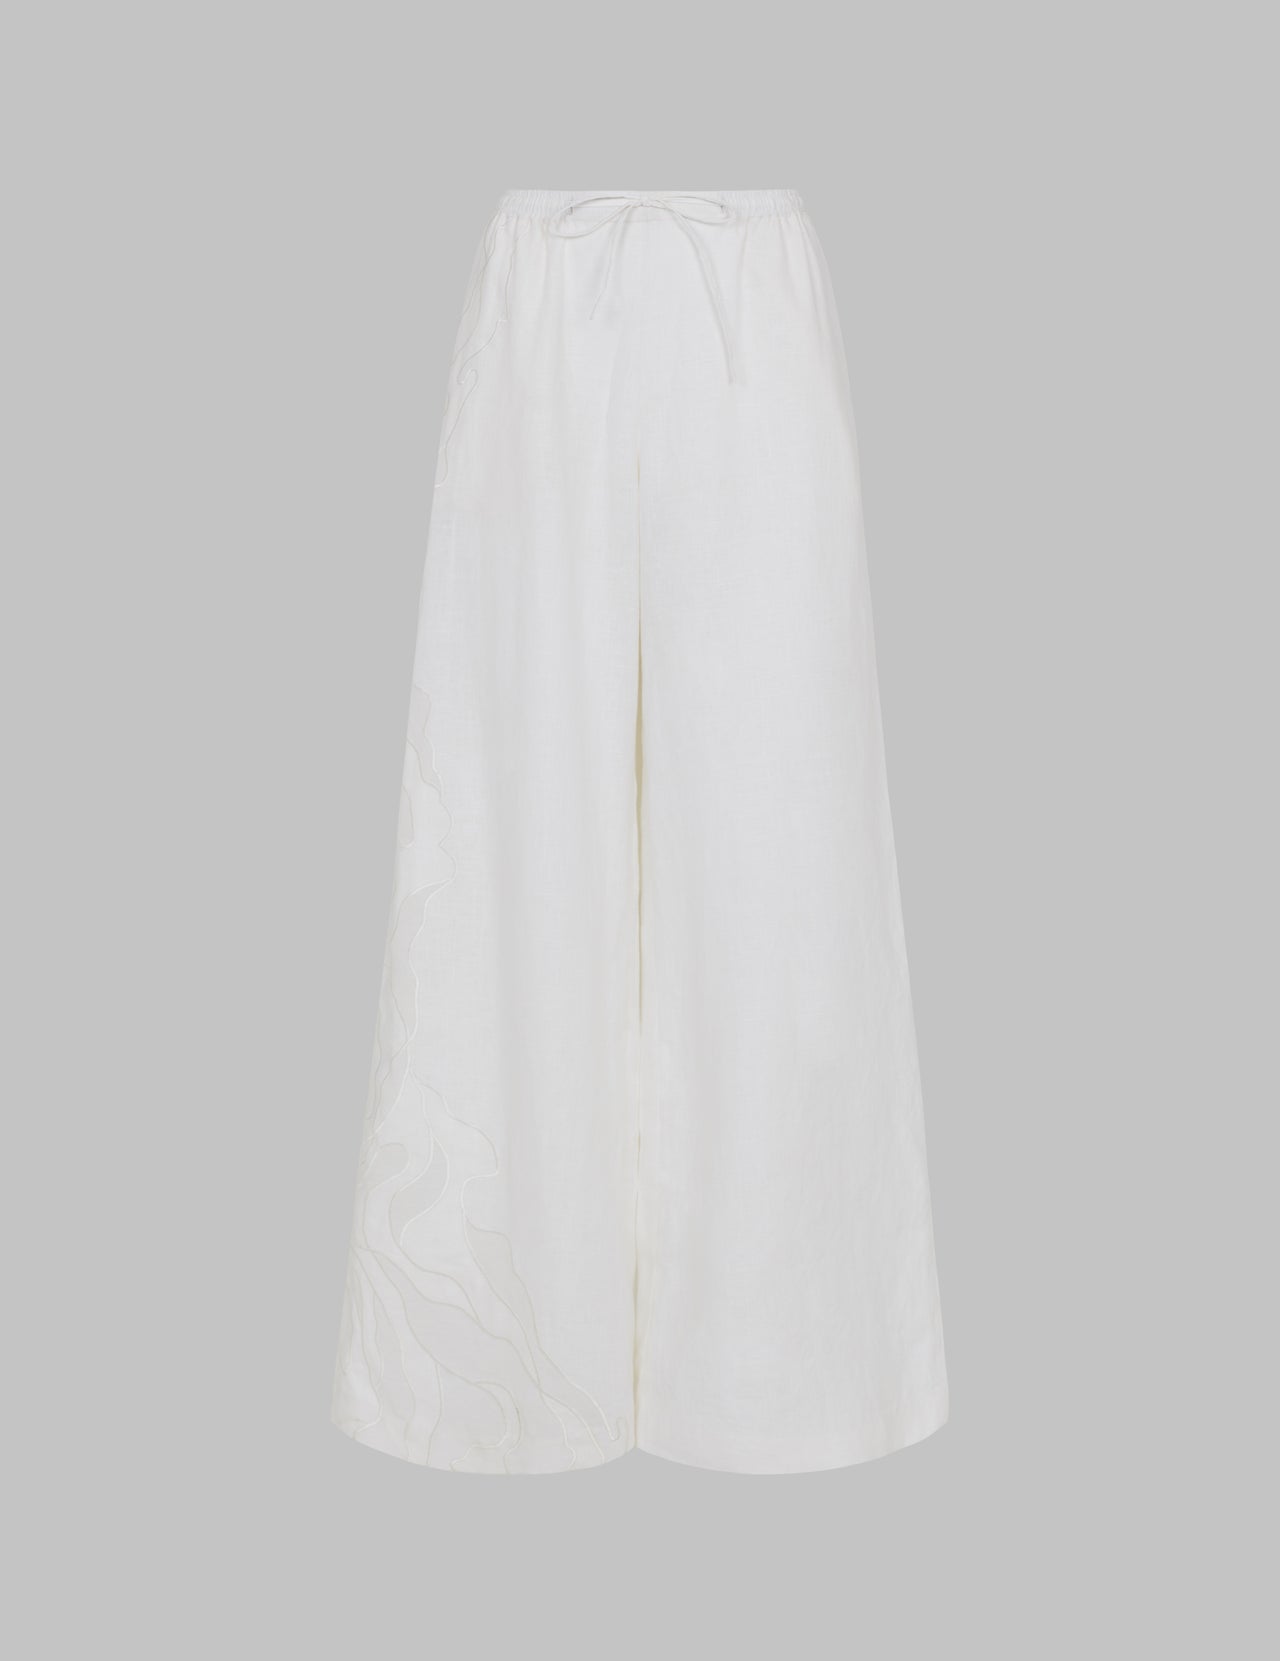  White Linen Drawstring Wide Leg Trousers with Cutwork Appliqué 